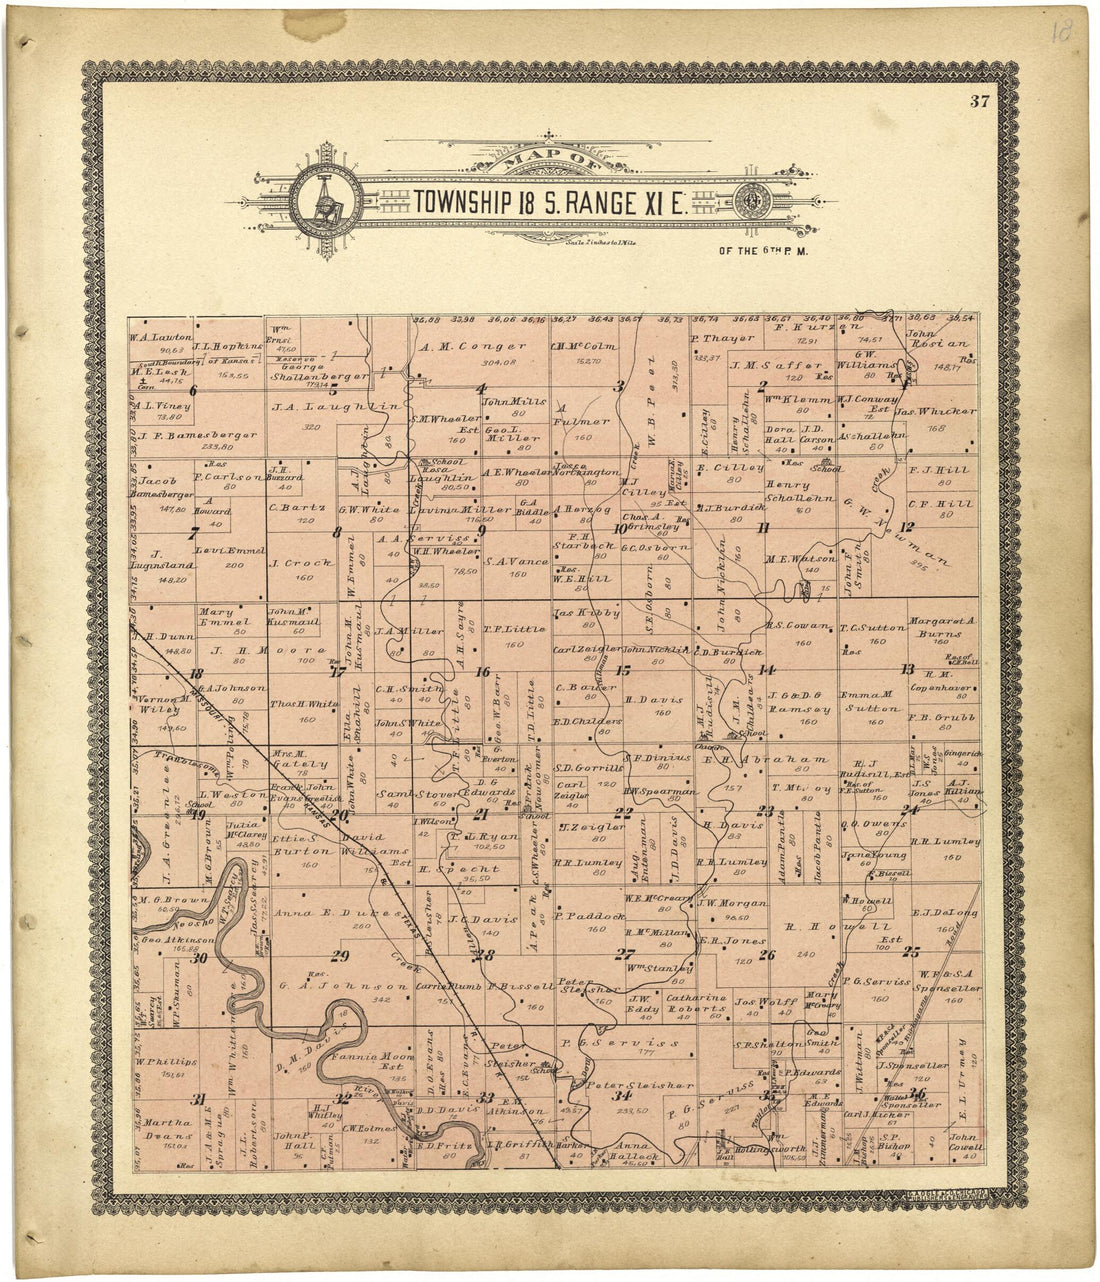 This old map of Map of Township 18 S. Range XI E. from Standard Atlas of Lyon County, Kansas from 1901 was created by  Geo. A. Ogle &amp; Co in 1901